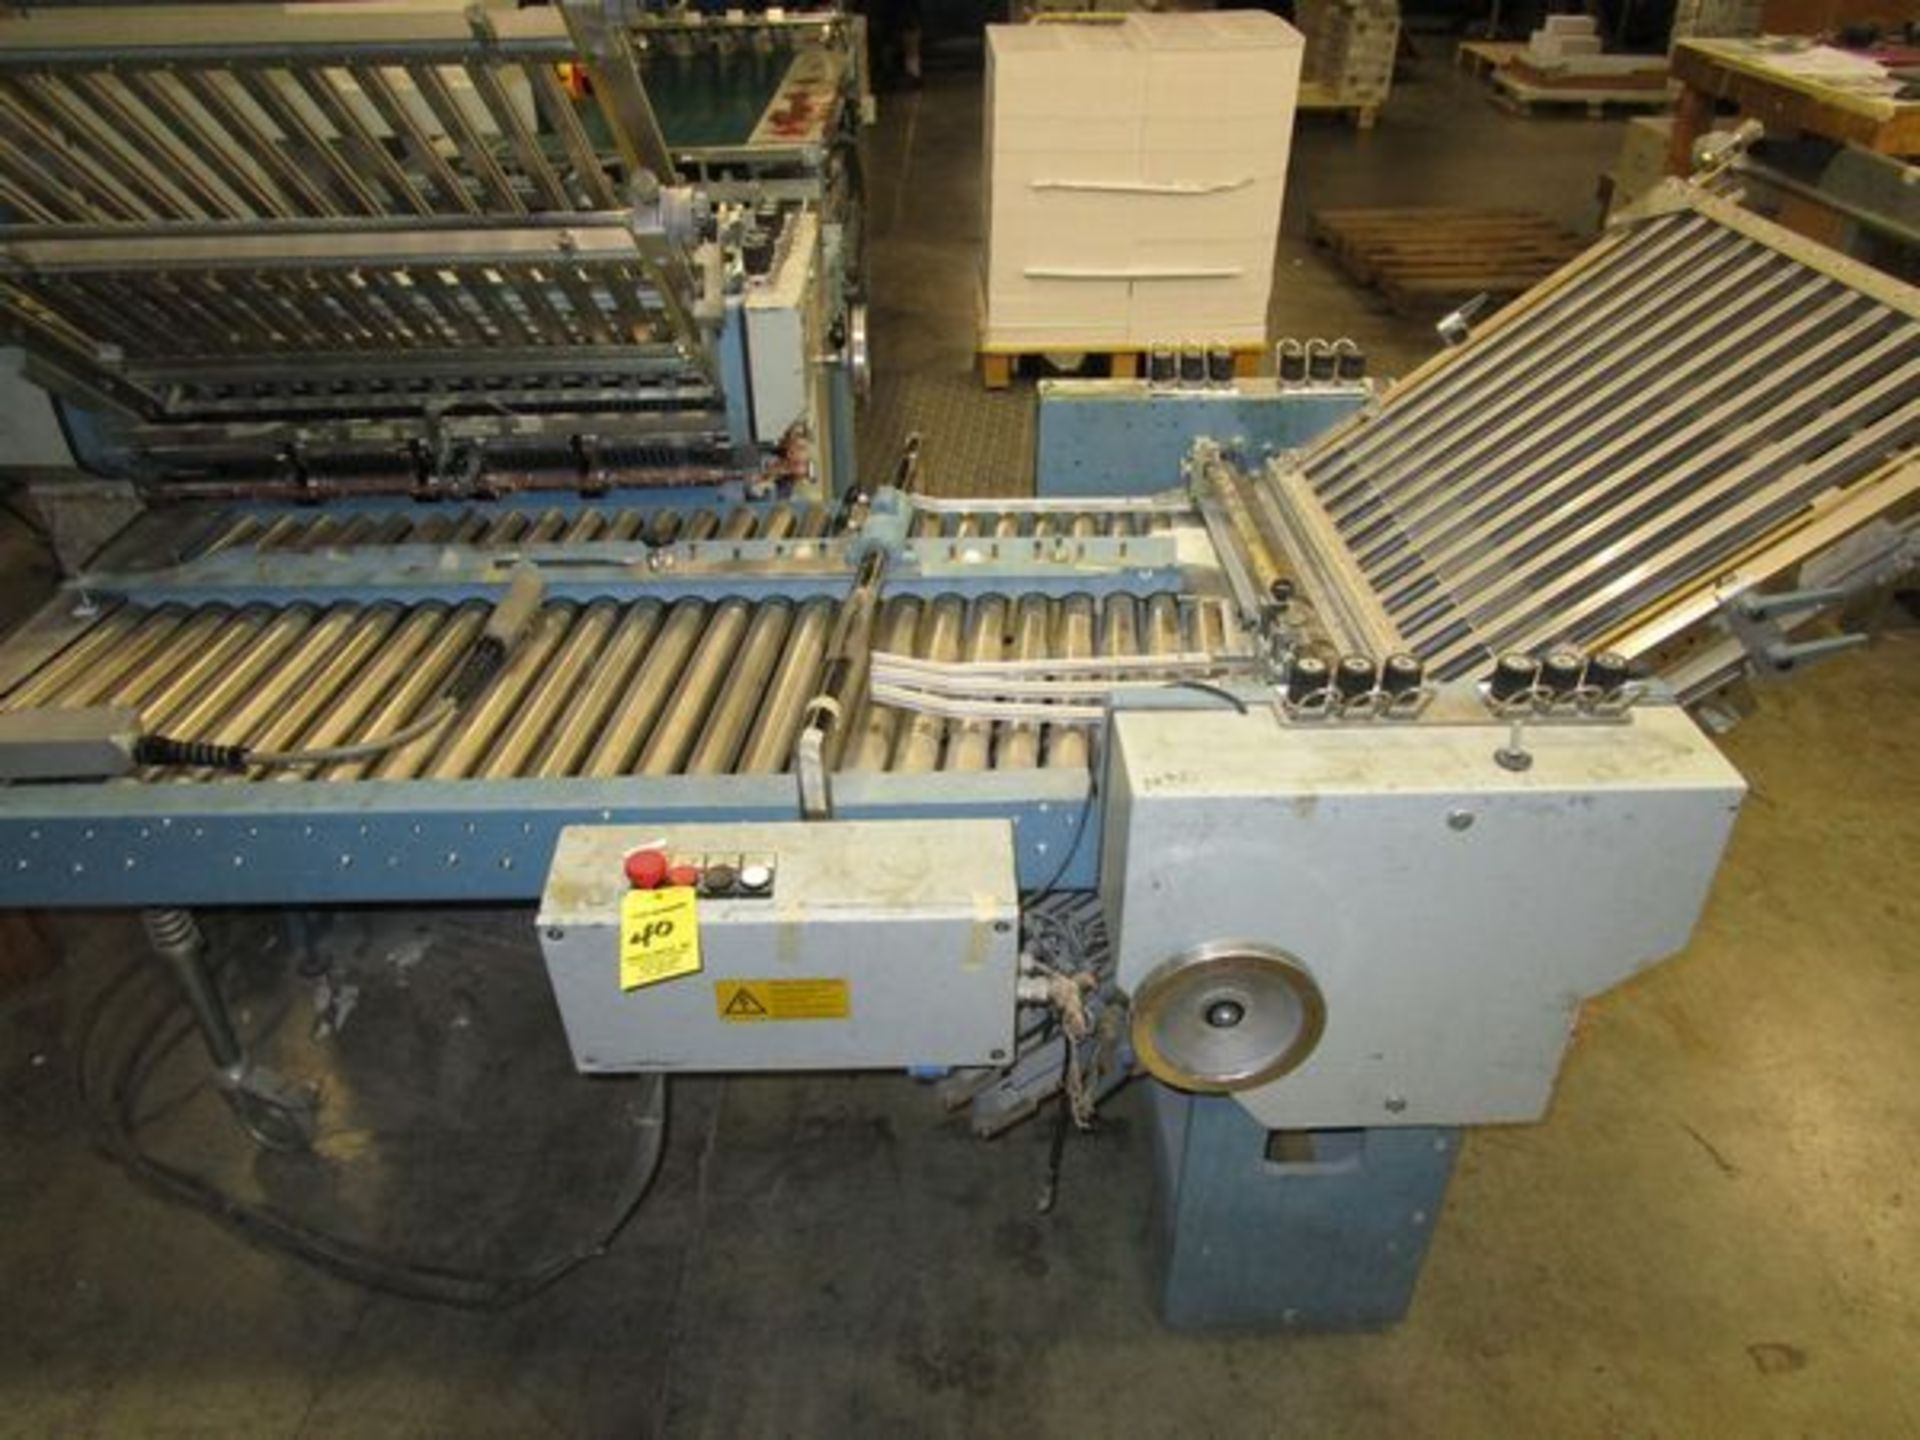 MBO B123-1-23/4 Continuous Fed 23" Folder, s/n T10/63, w/Segmented Rollers, HHS Glue Control for - Image 3 of 5